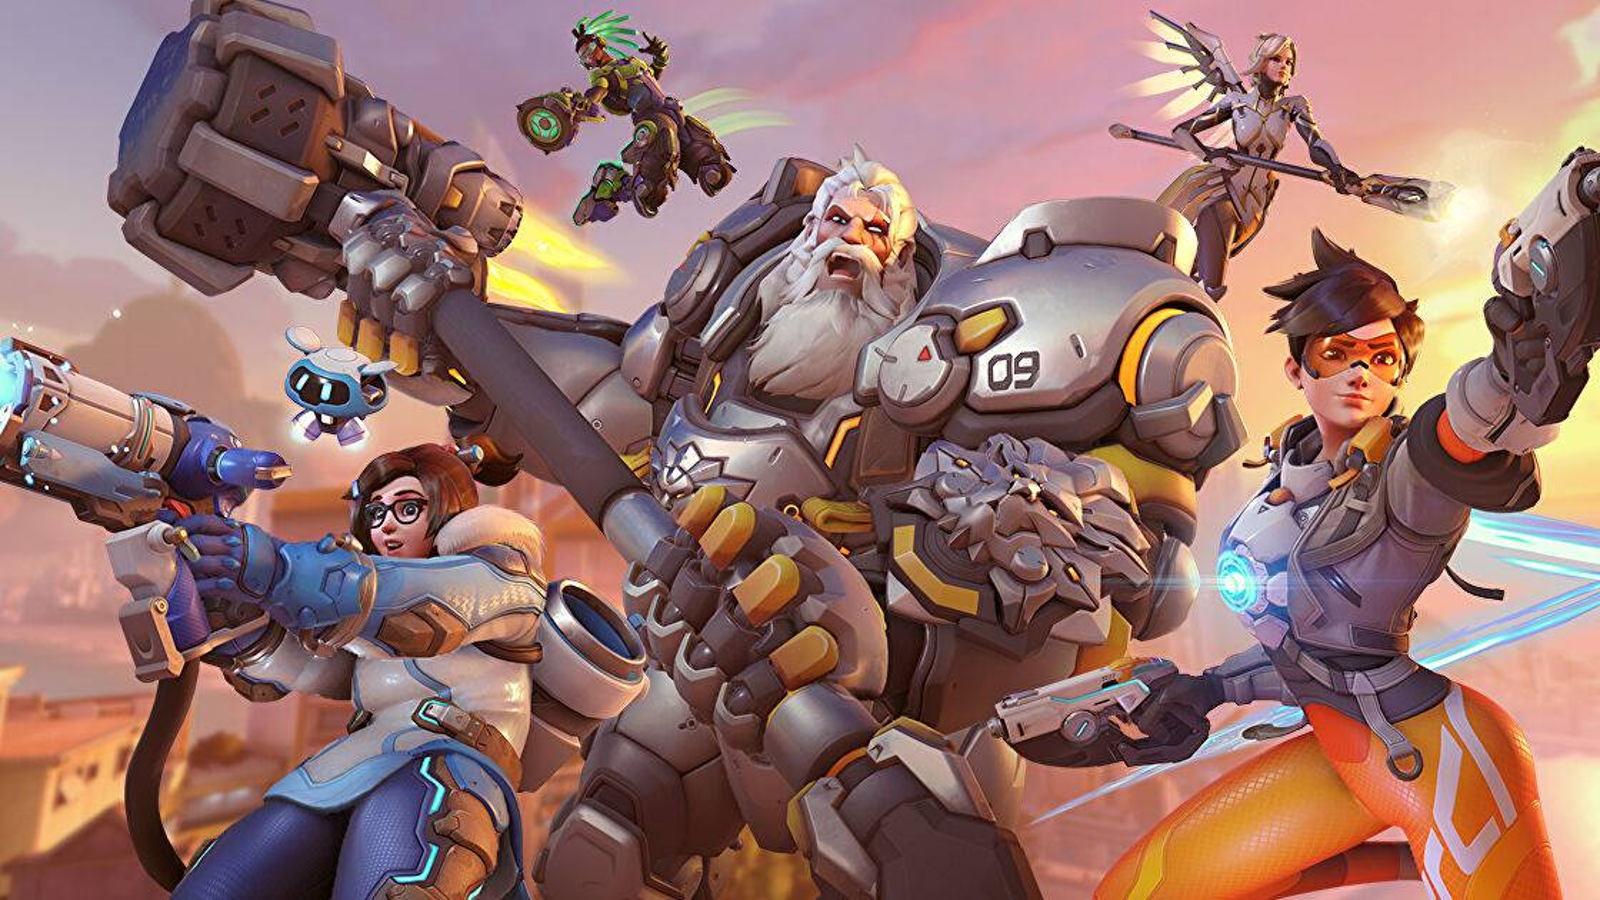 Overwatch 2 comes to Steam next month, more Blizzard games on the way